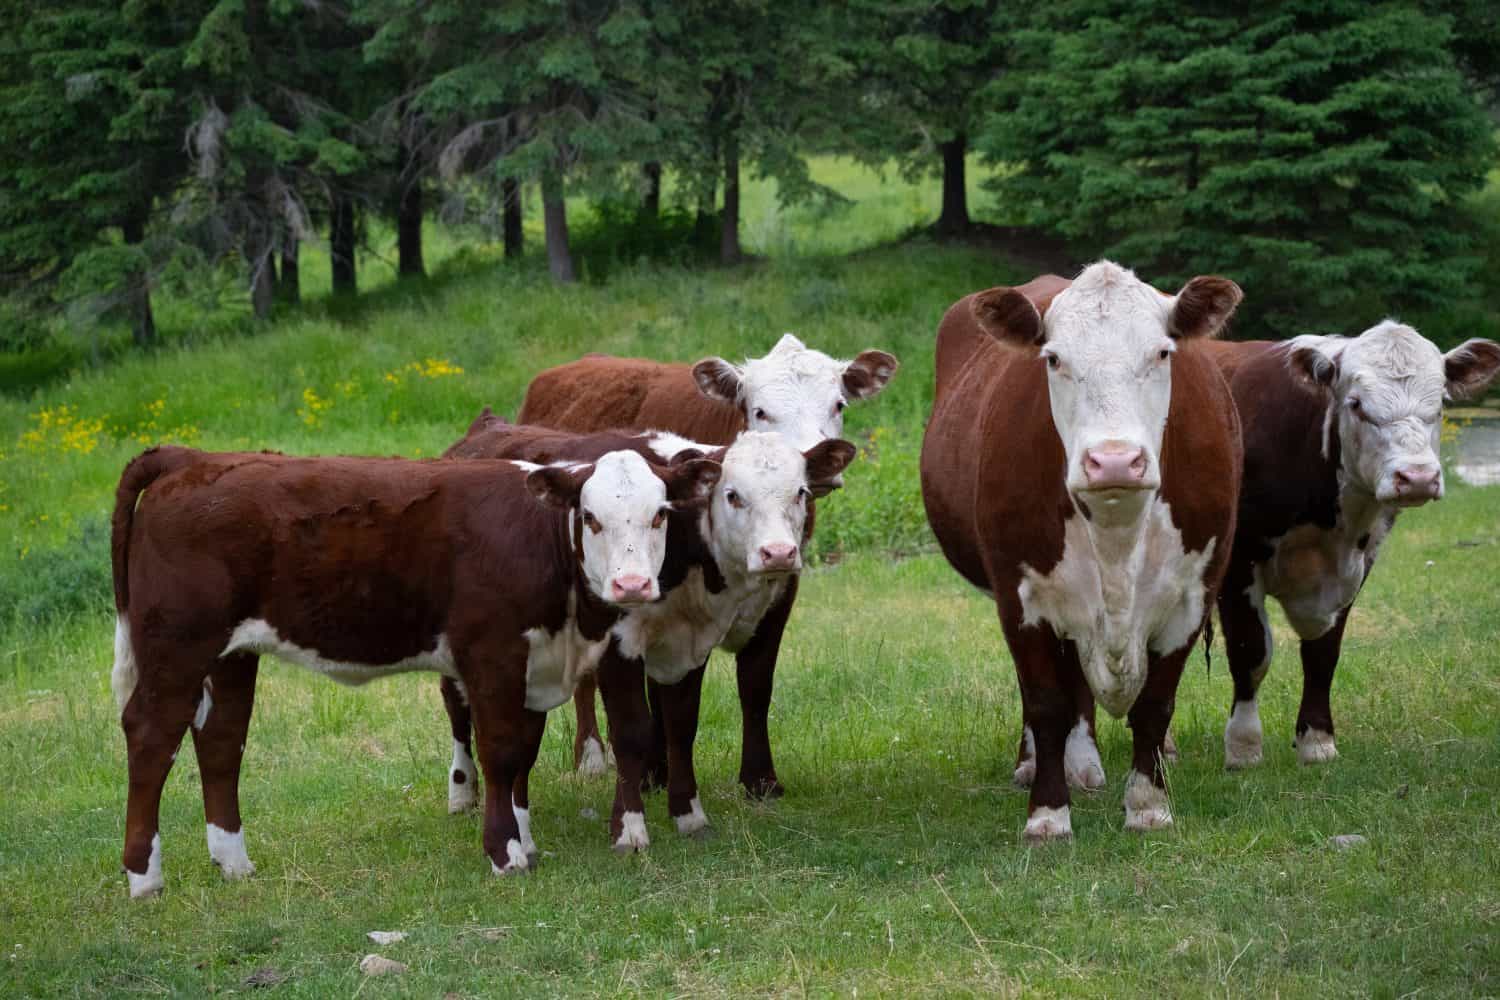 herd of hereford cows in green grassy pasture on agricultural farm brown and white cows with white faces looking at camera in the countryside horizontal format room for type beef industry background